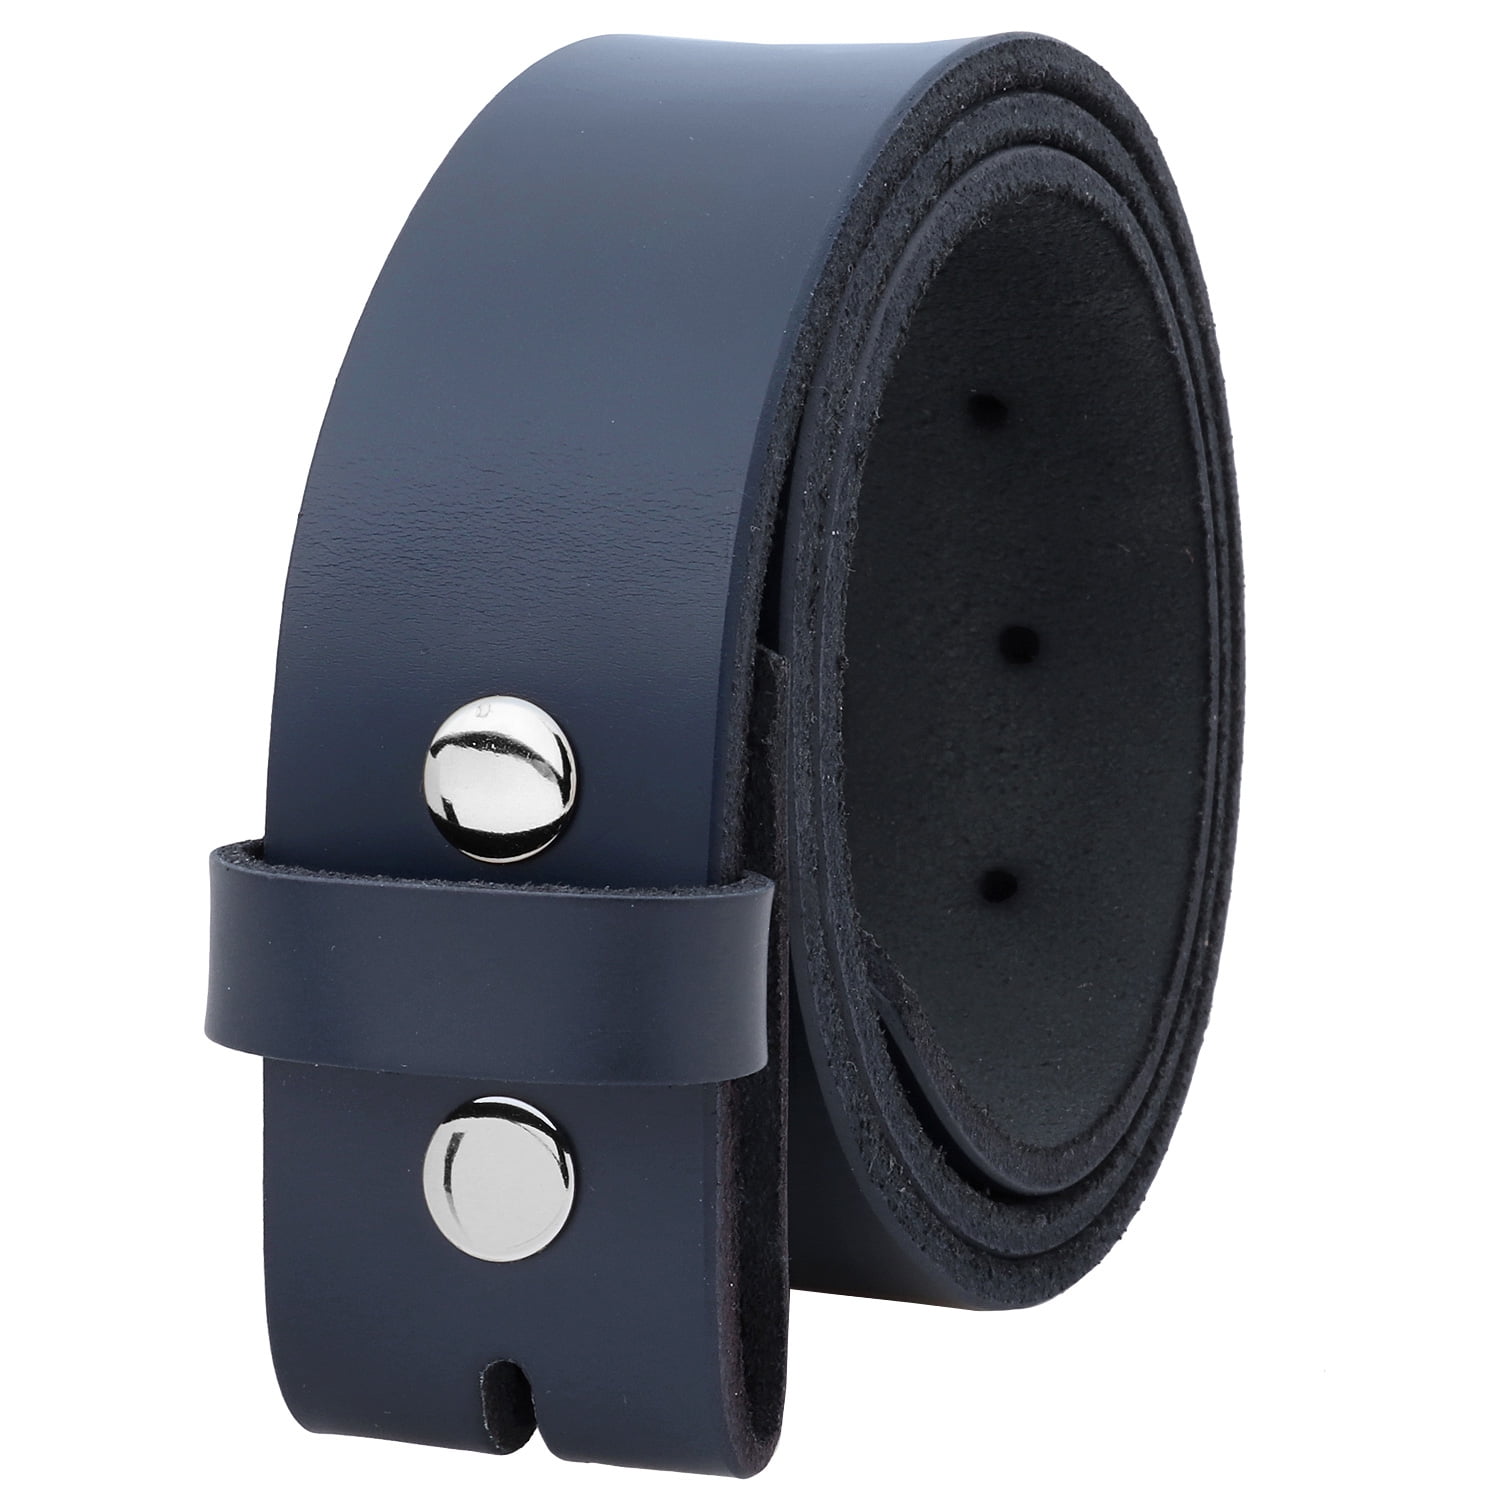 without Buckle 40mm Men's Replacement Leather Waist Belt 1.5 inch wide